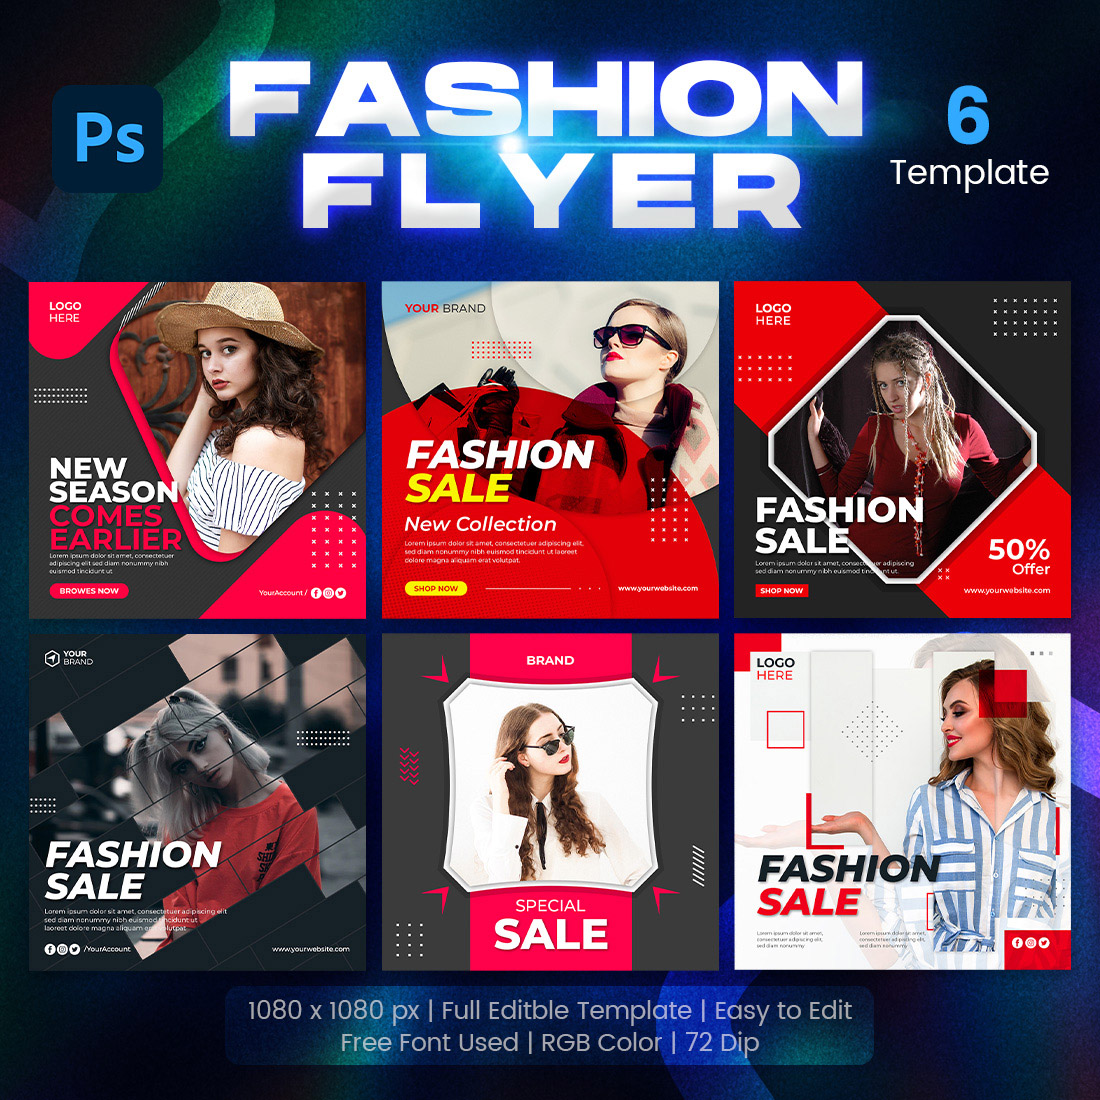 Fashion Sale Square Flyer for Social Media Post 6 Set Template main cover.